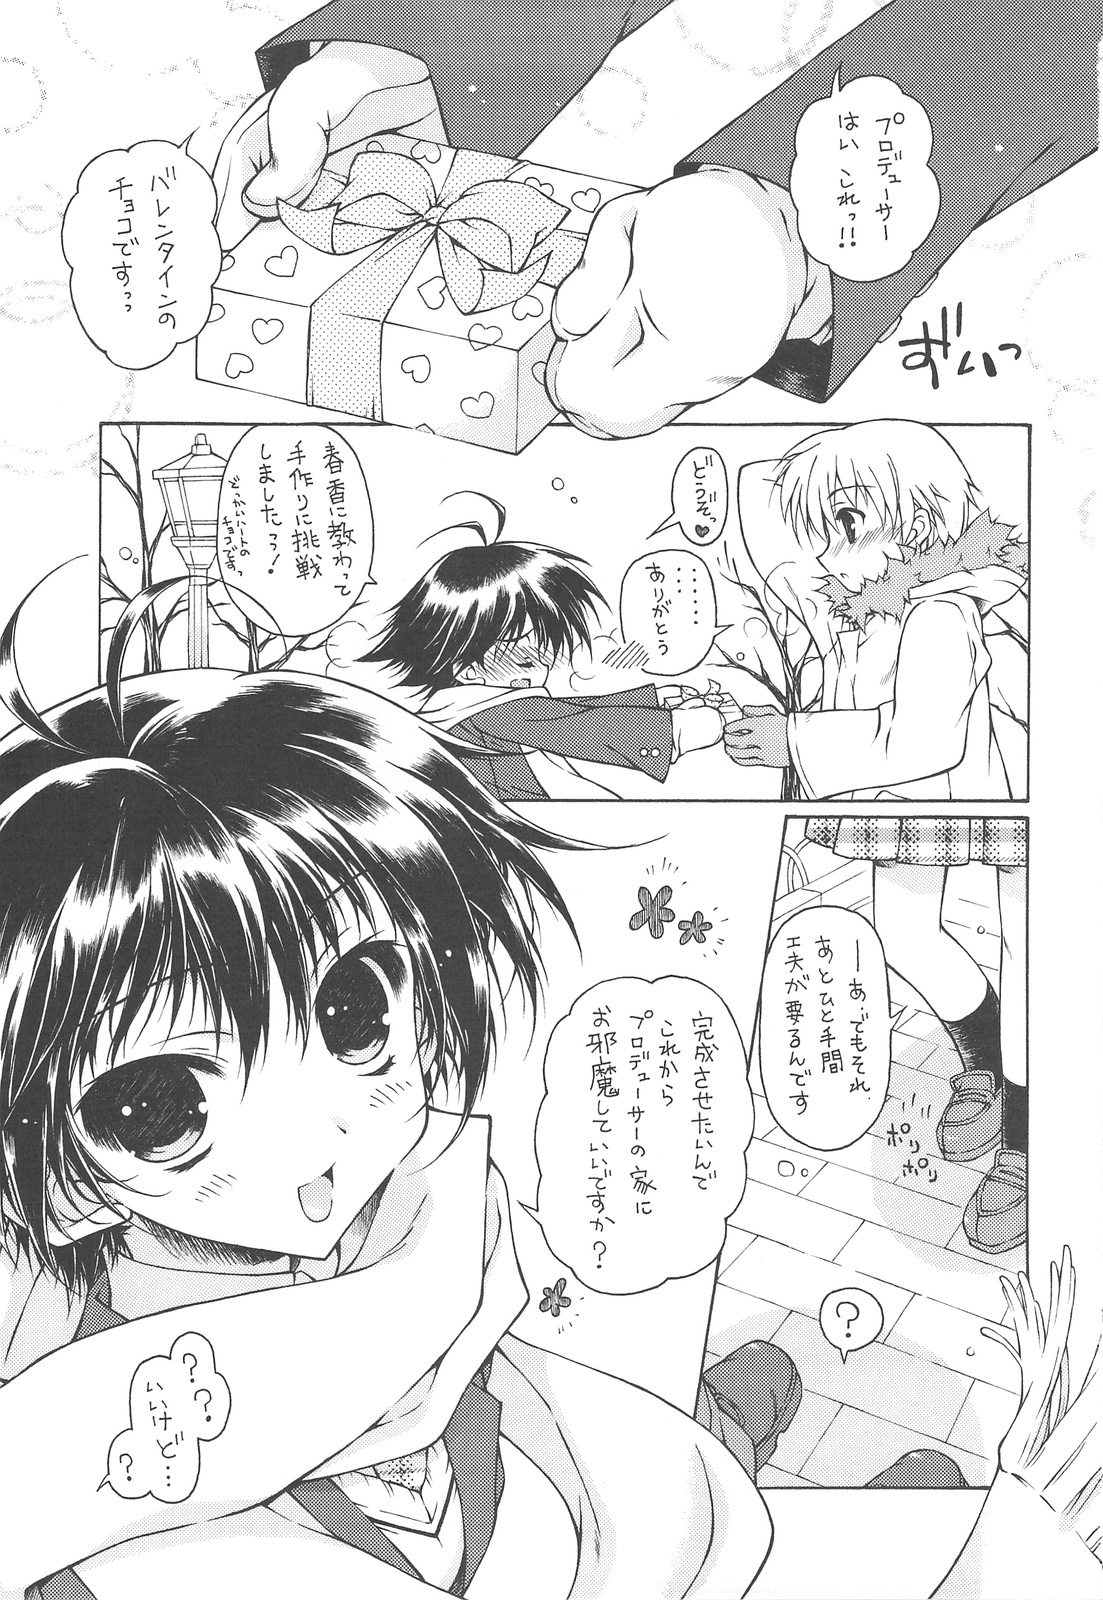 (SC42) [KONOHA (Homigiwa Ichiyou)] Stay as sweet as you are (THE iDOLM@STER) page 2 full